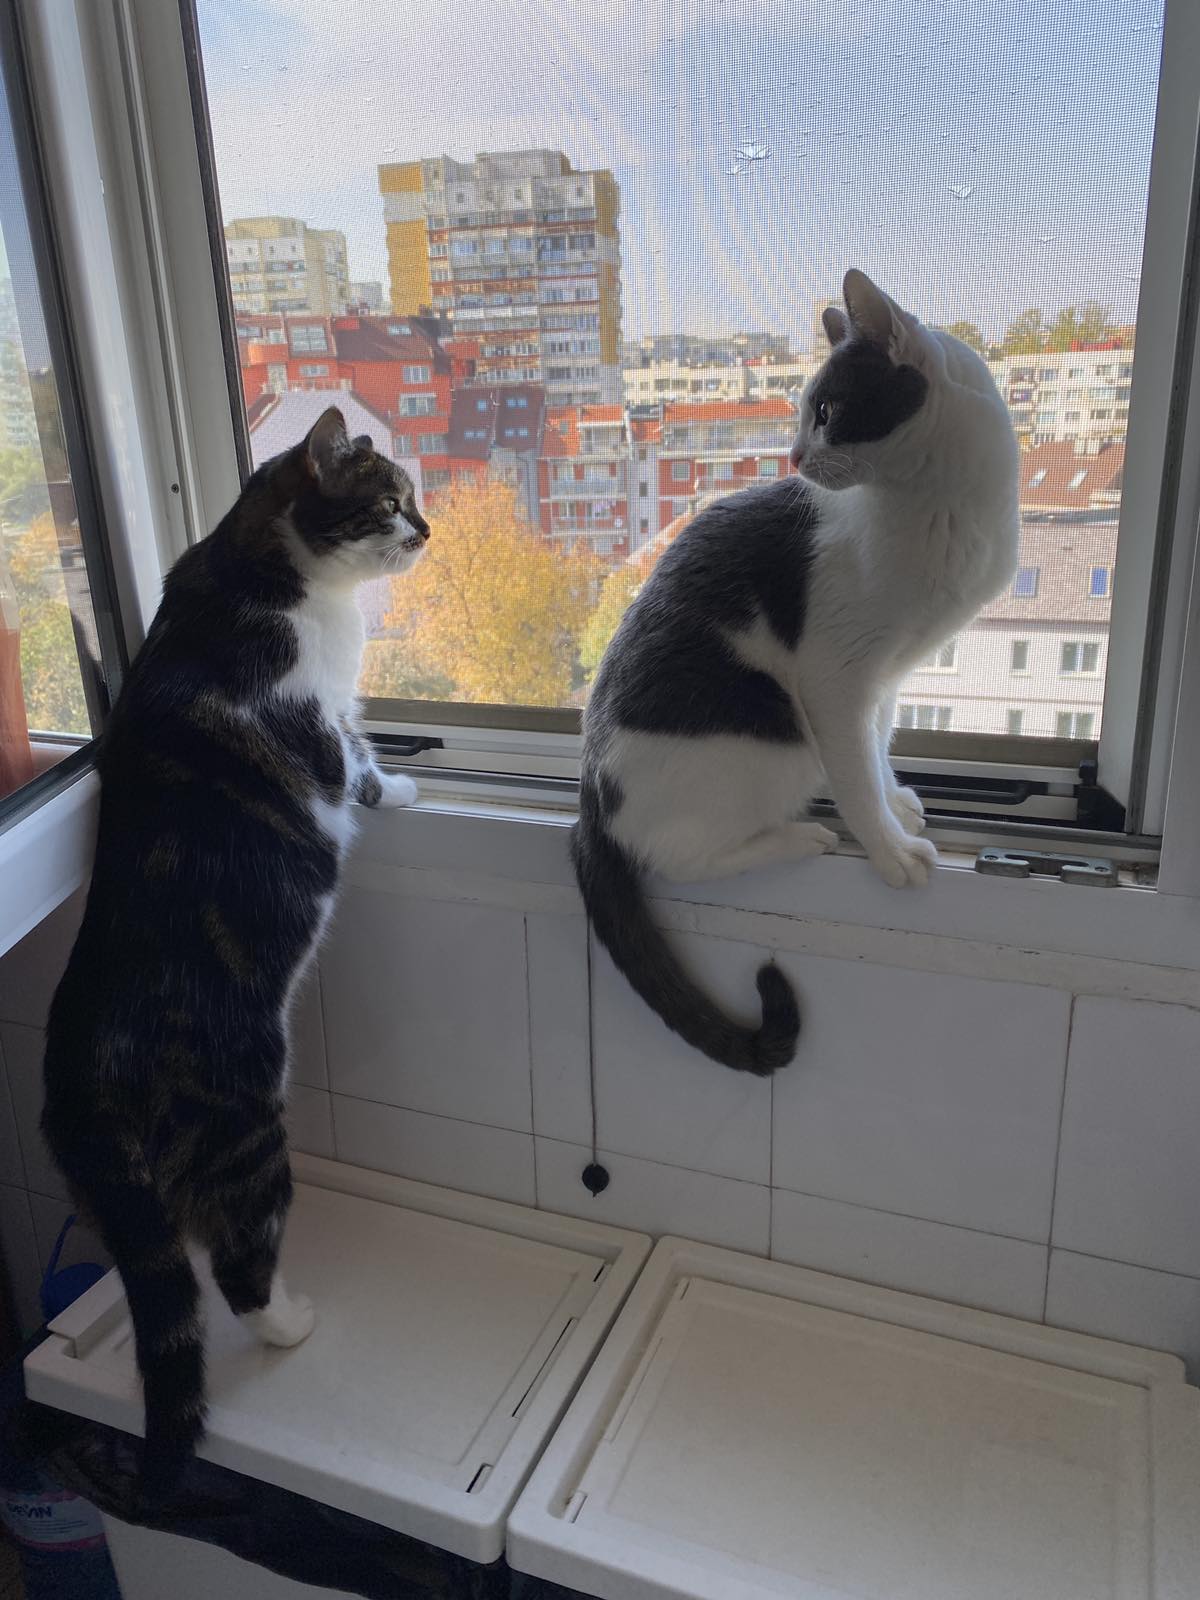 two cats sitting together about 2' apart looking outside a large window